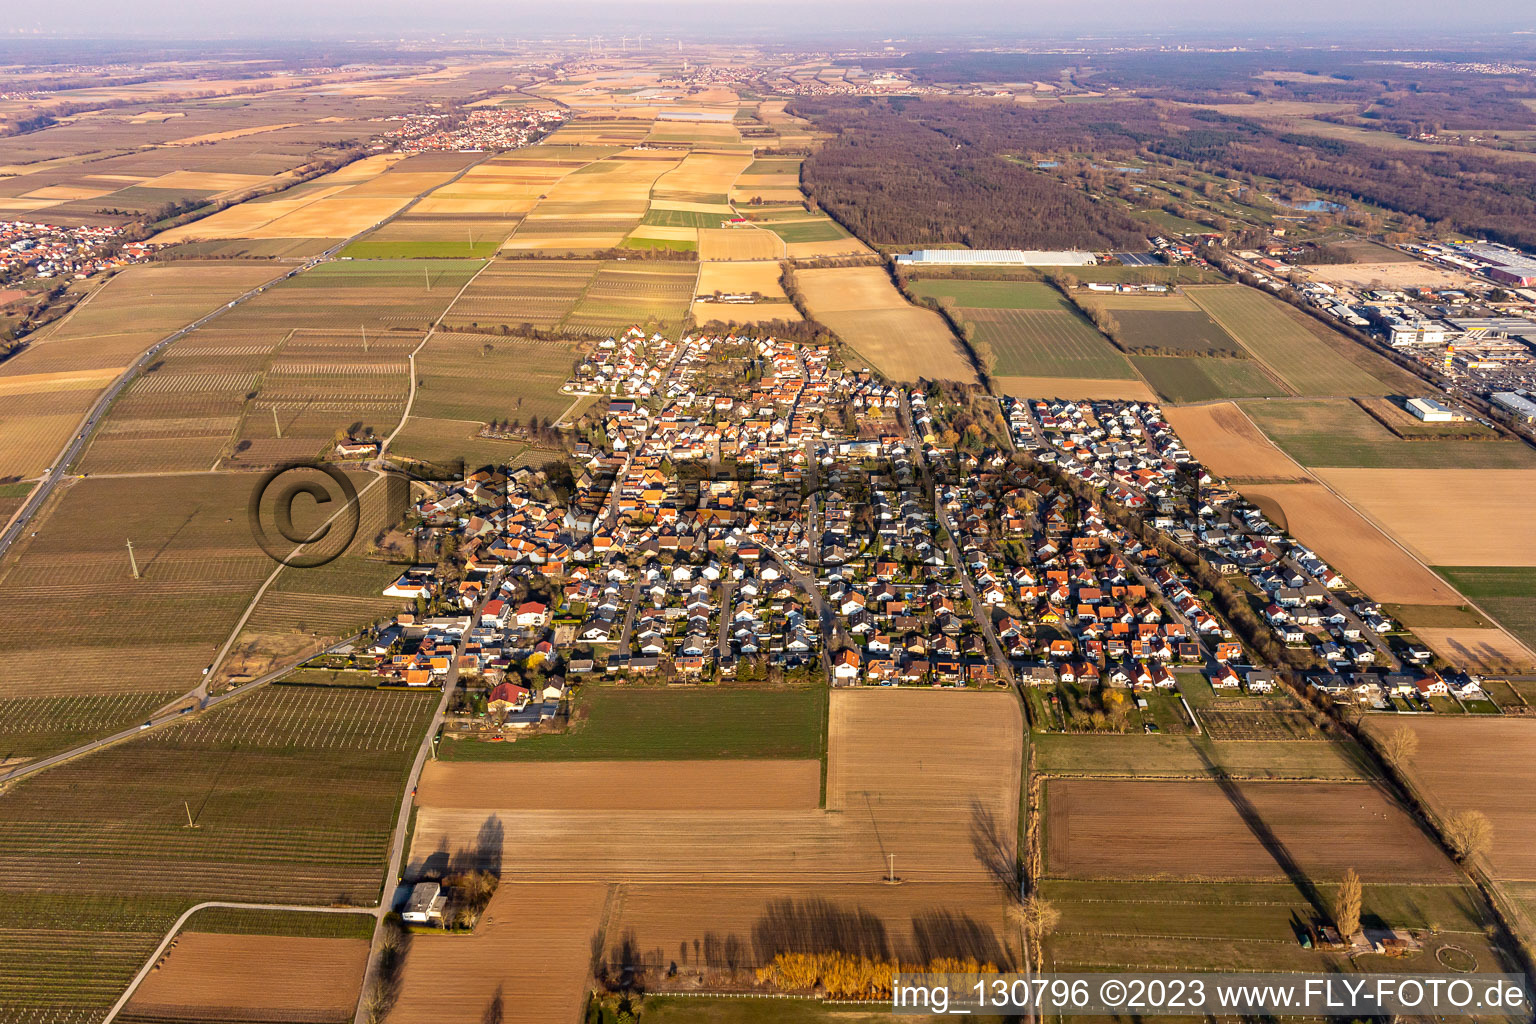 Aerial photograpy of Bornheim in the state Rhineland-Palatinate, Germany